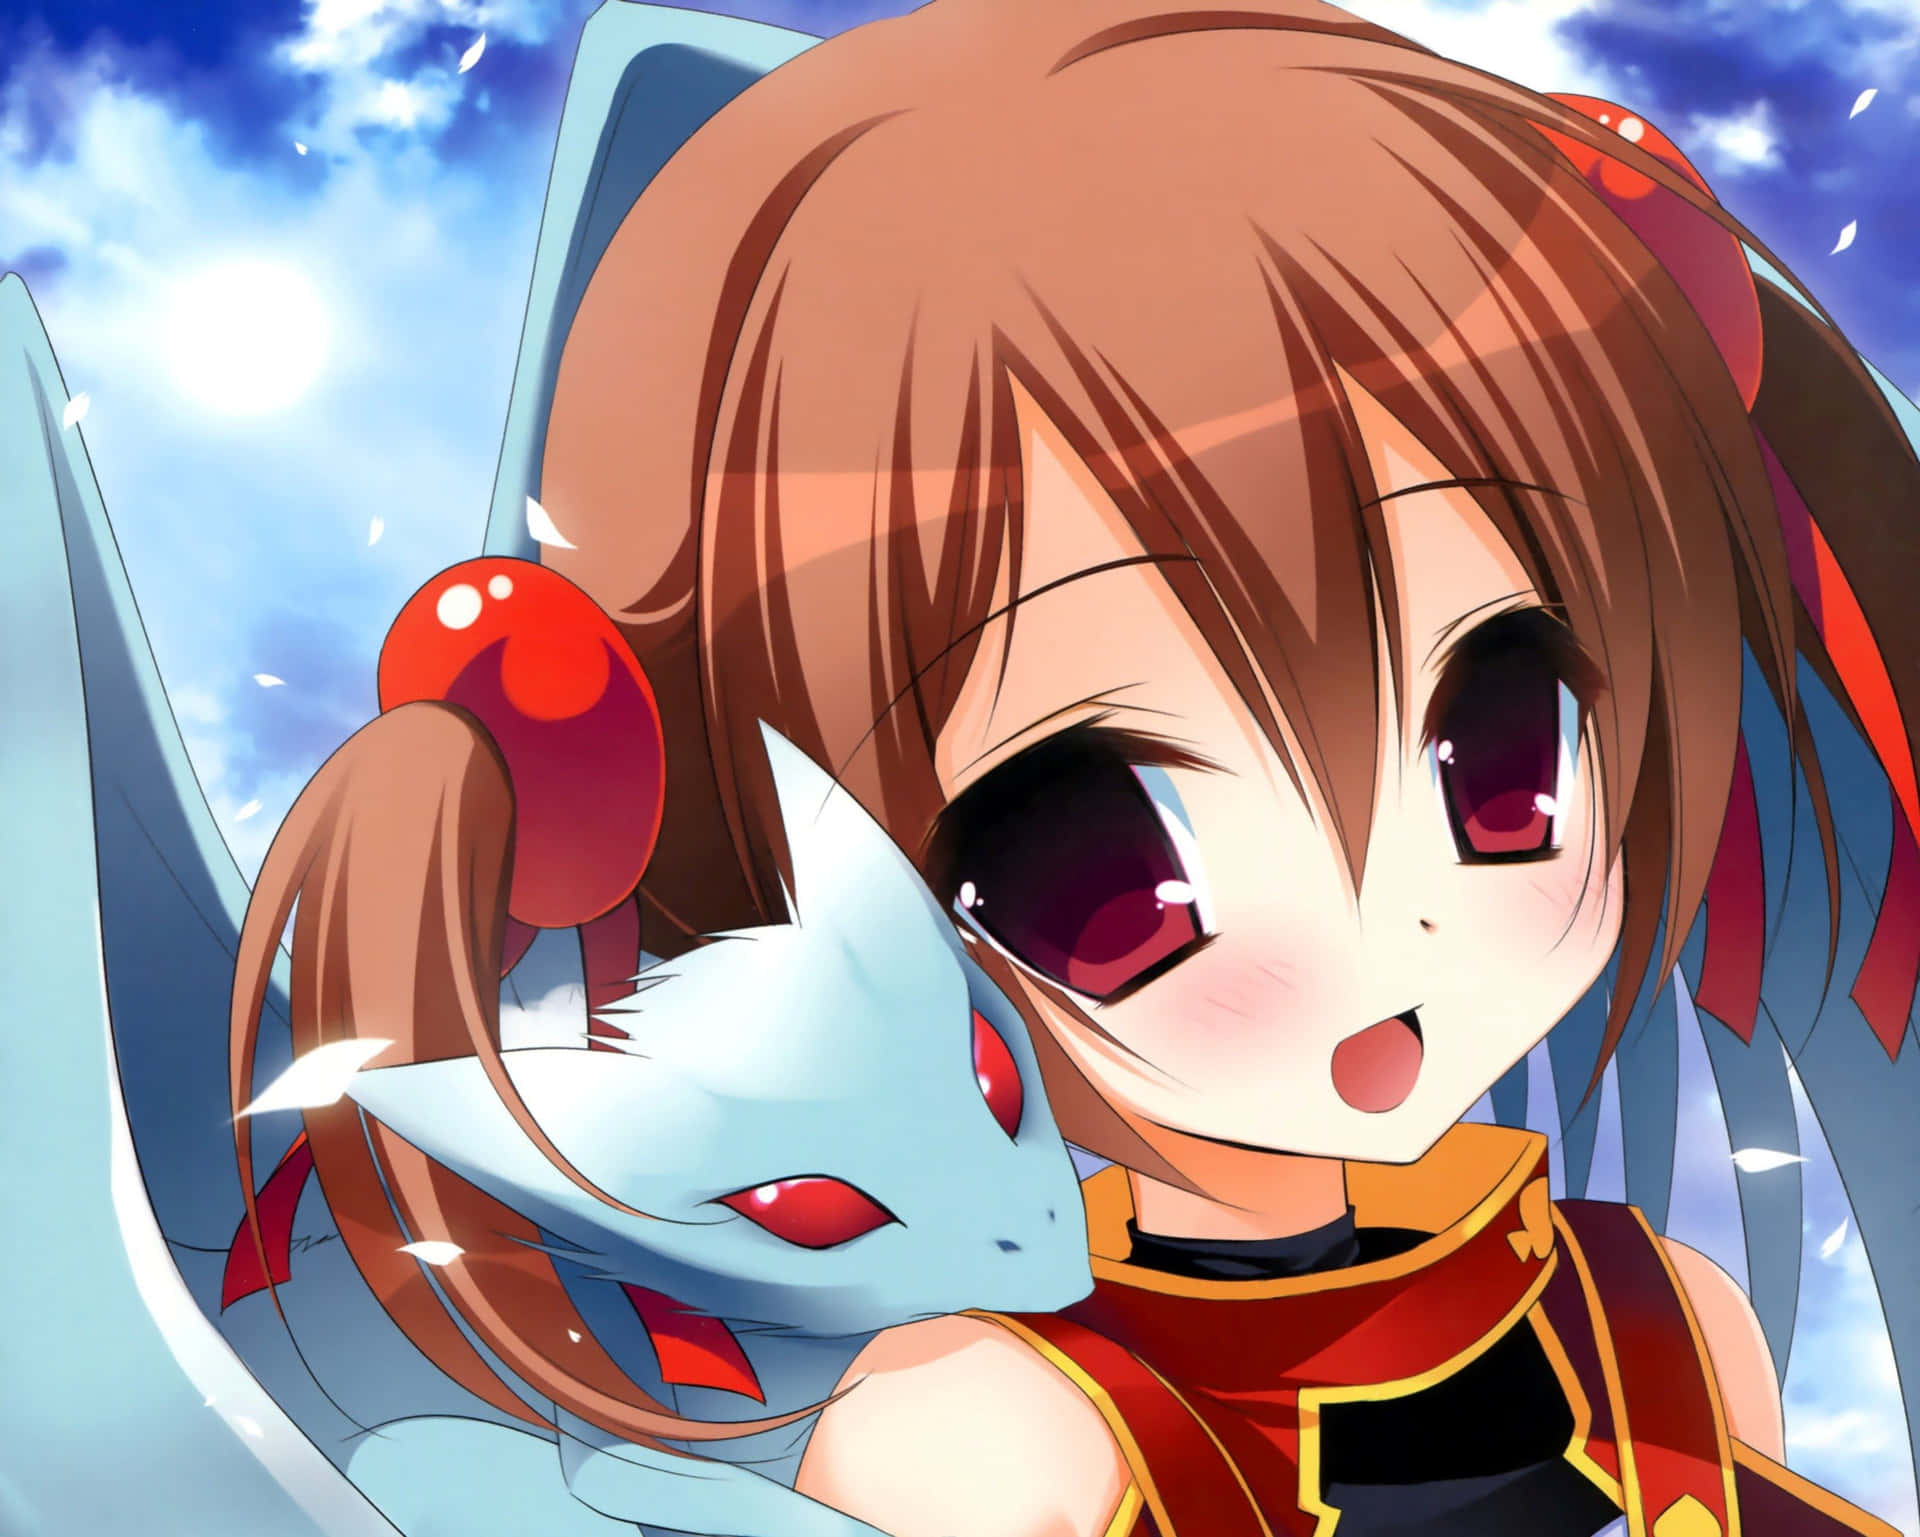 Silica from Sword Art Online with her Dragon Pina Wallpaper